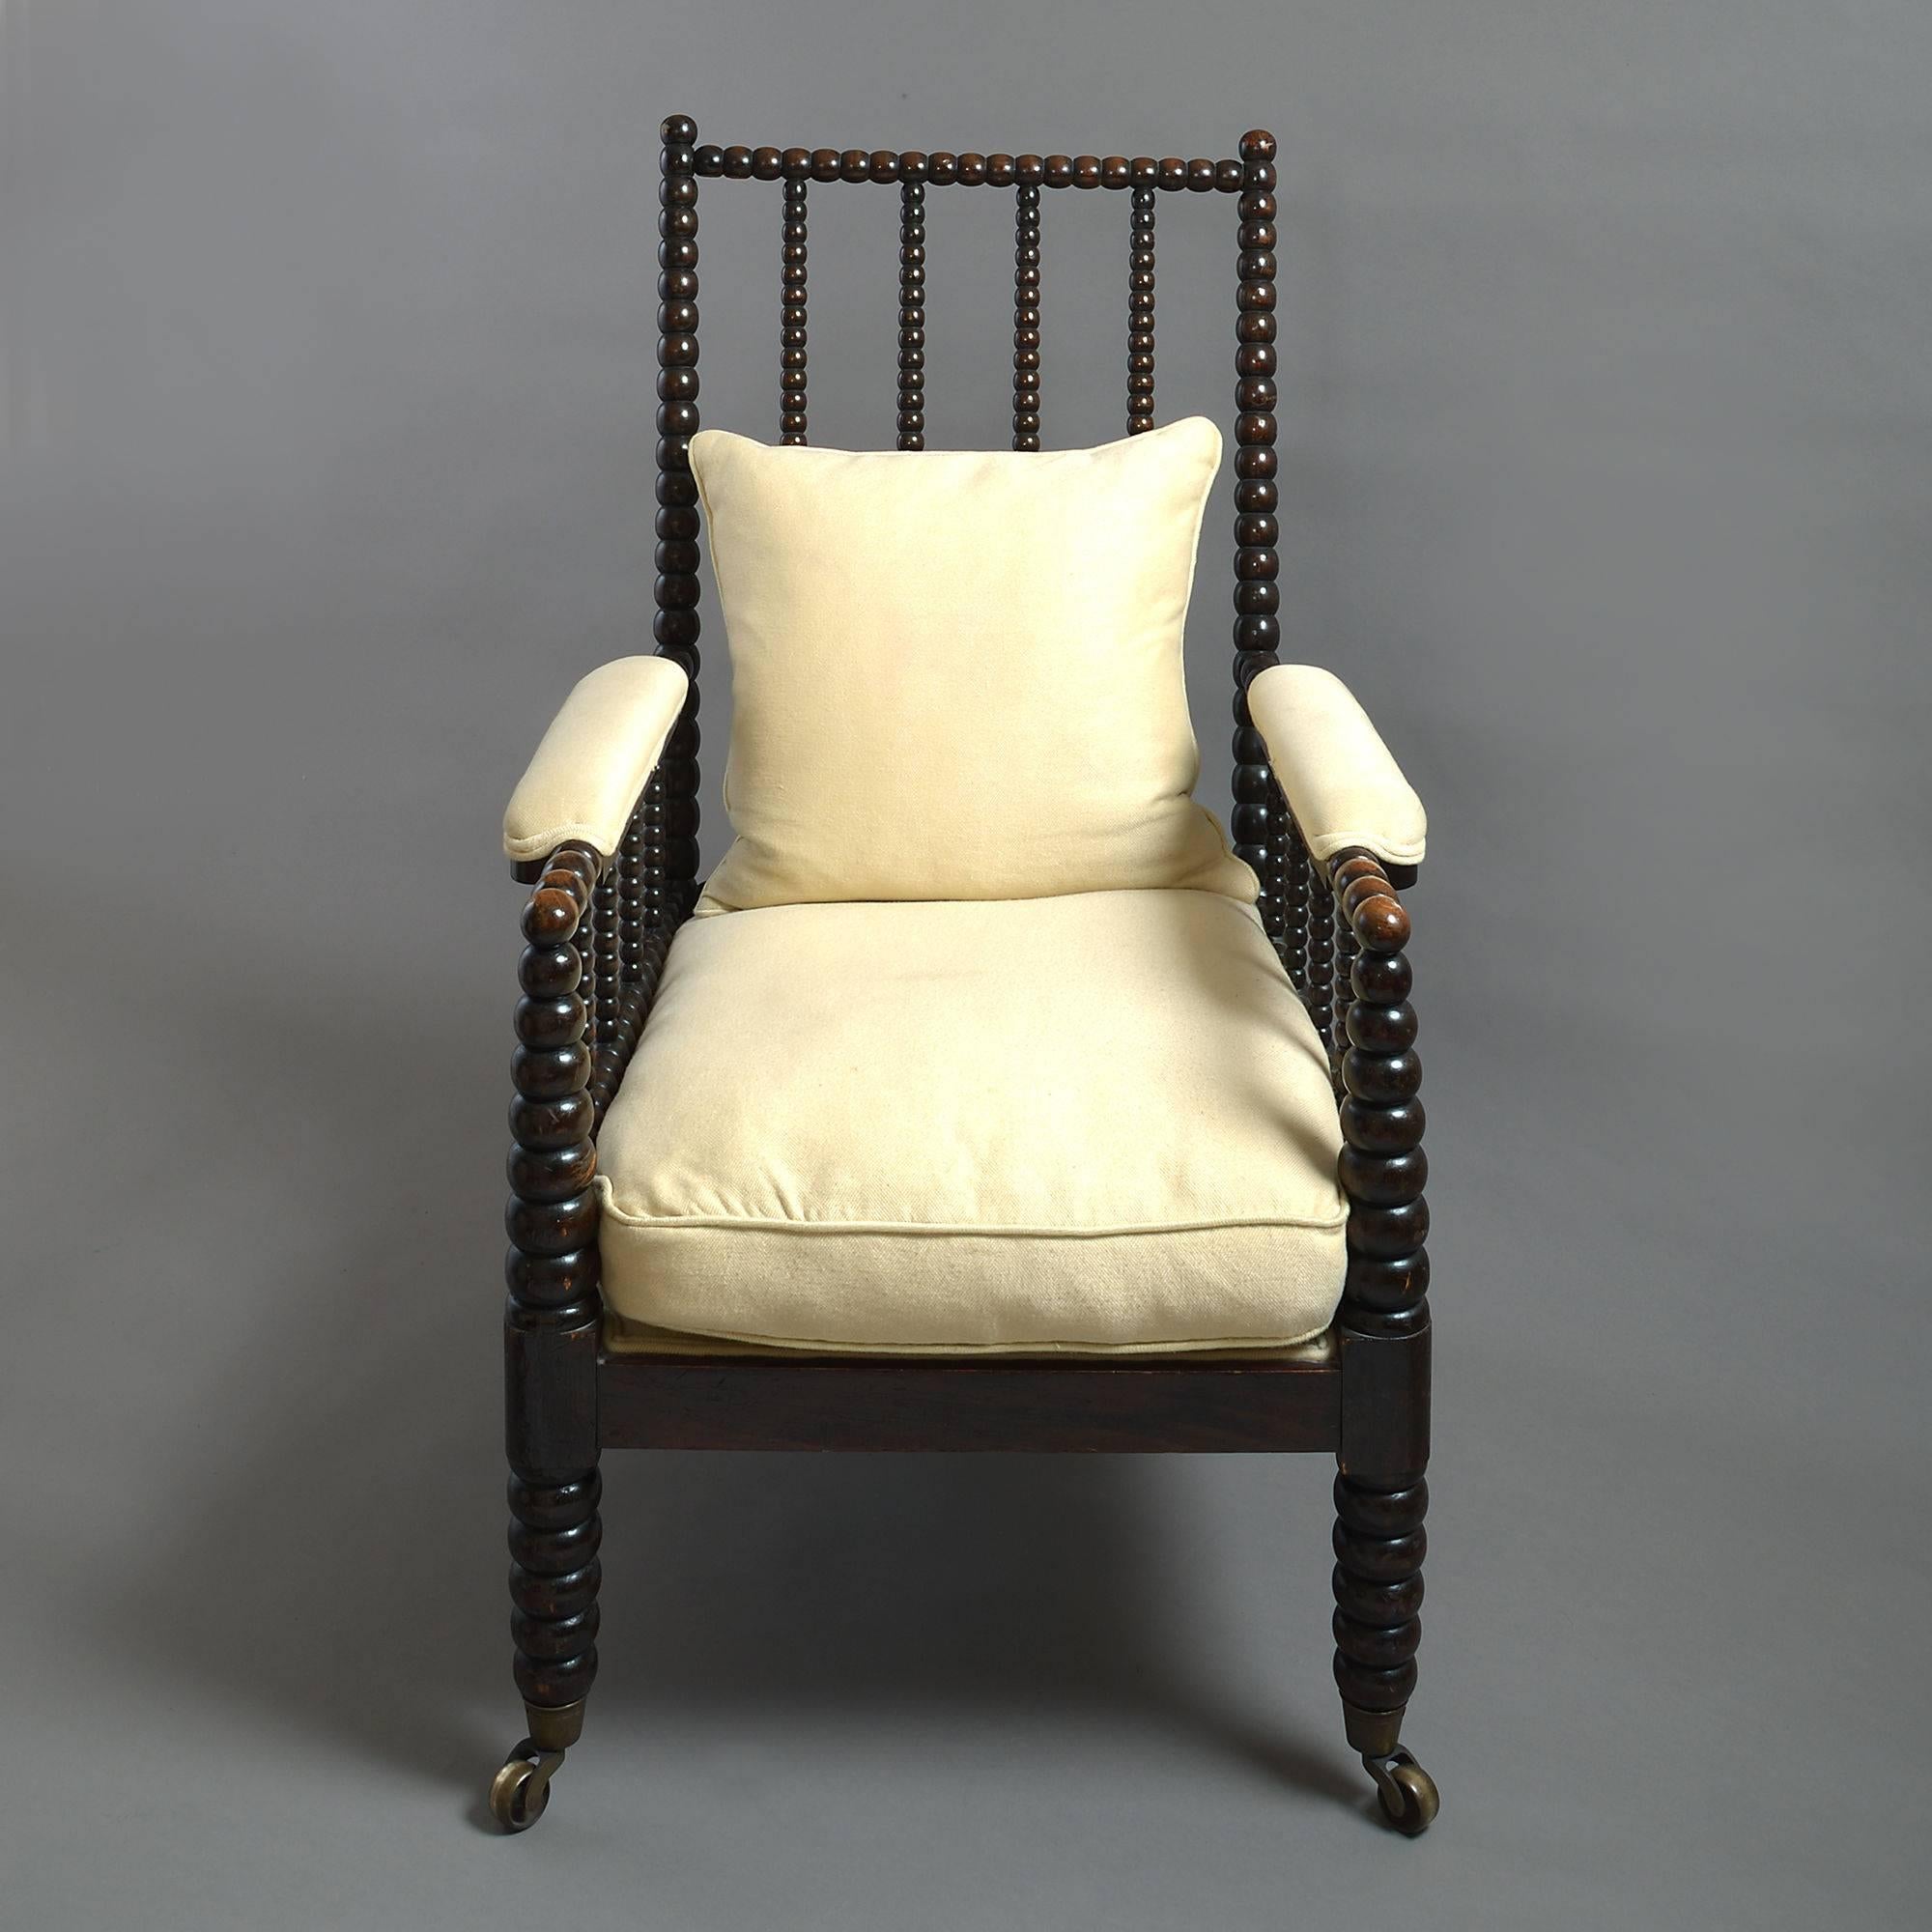 A large-scale mid-19th century ebonized bobbin turned spindle armchair, with upholstered arms and cushion seat, raised on the original brass castors.